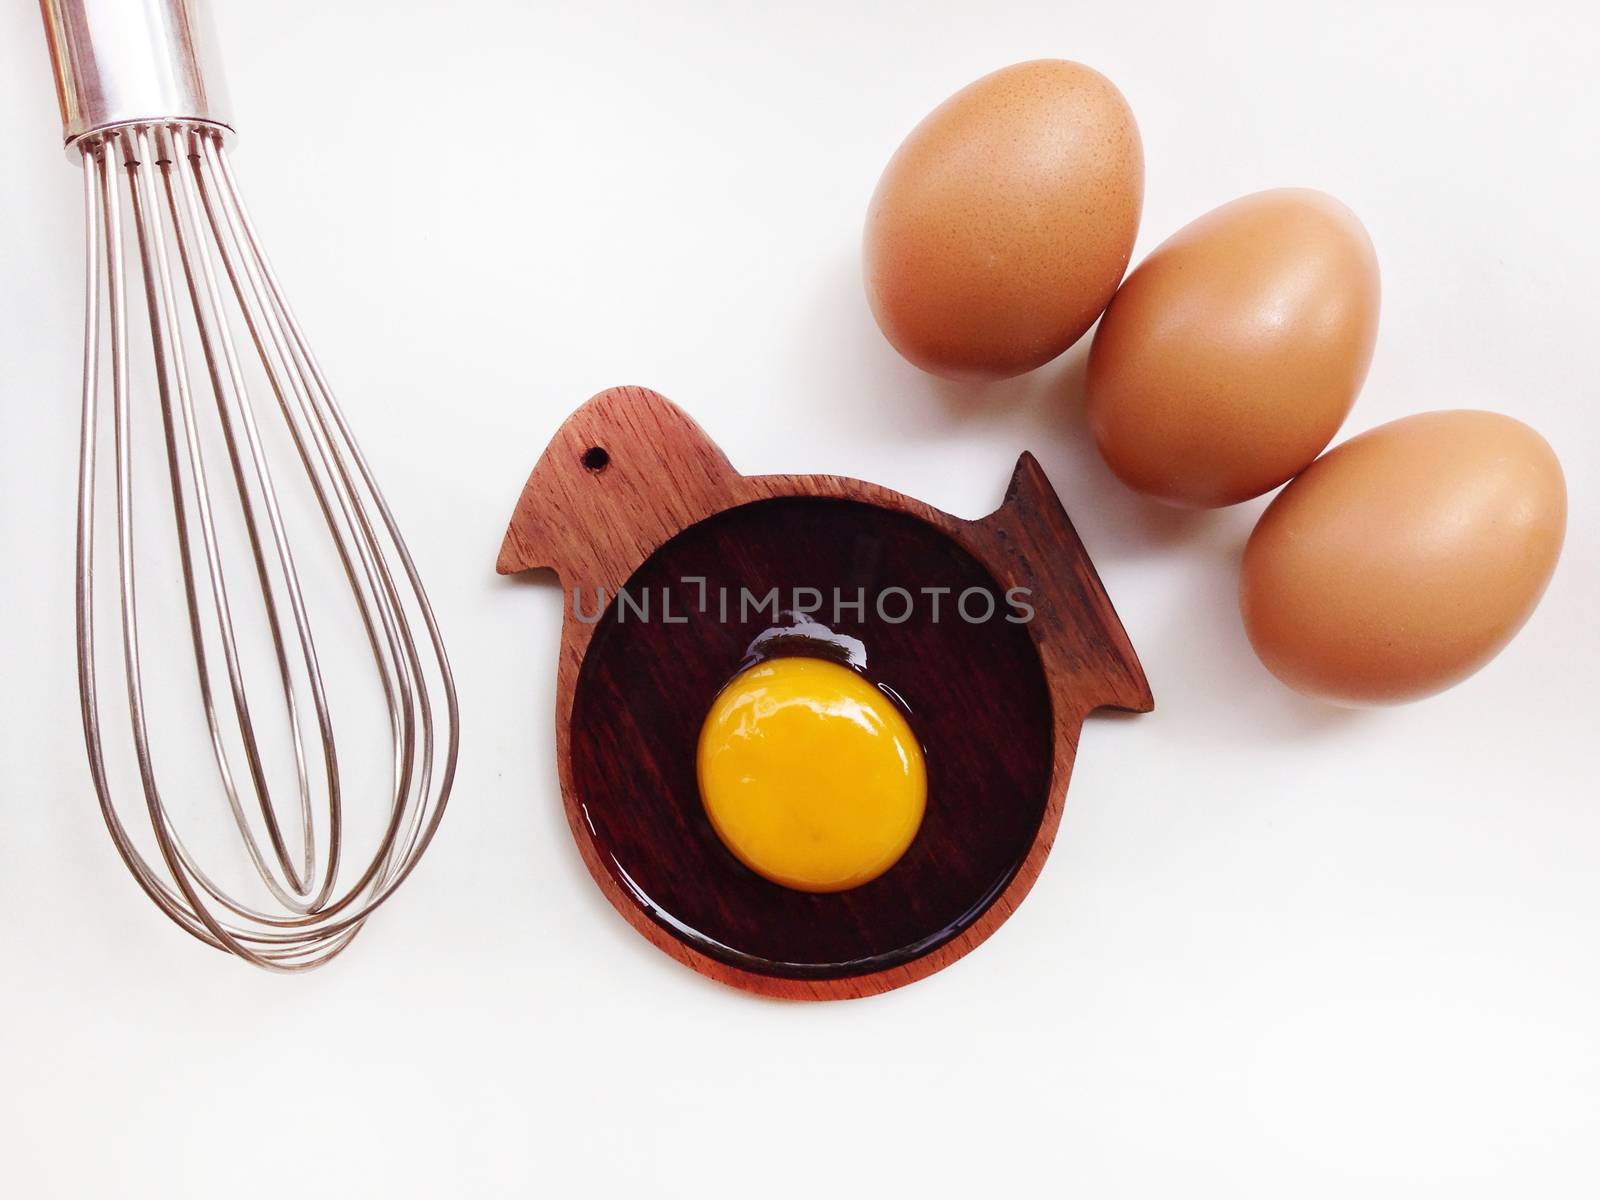 Egg yolk on wooden bird shaped saucer with eggs and egg whisk on white background